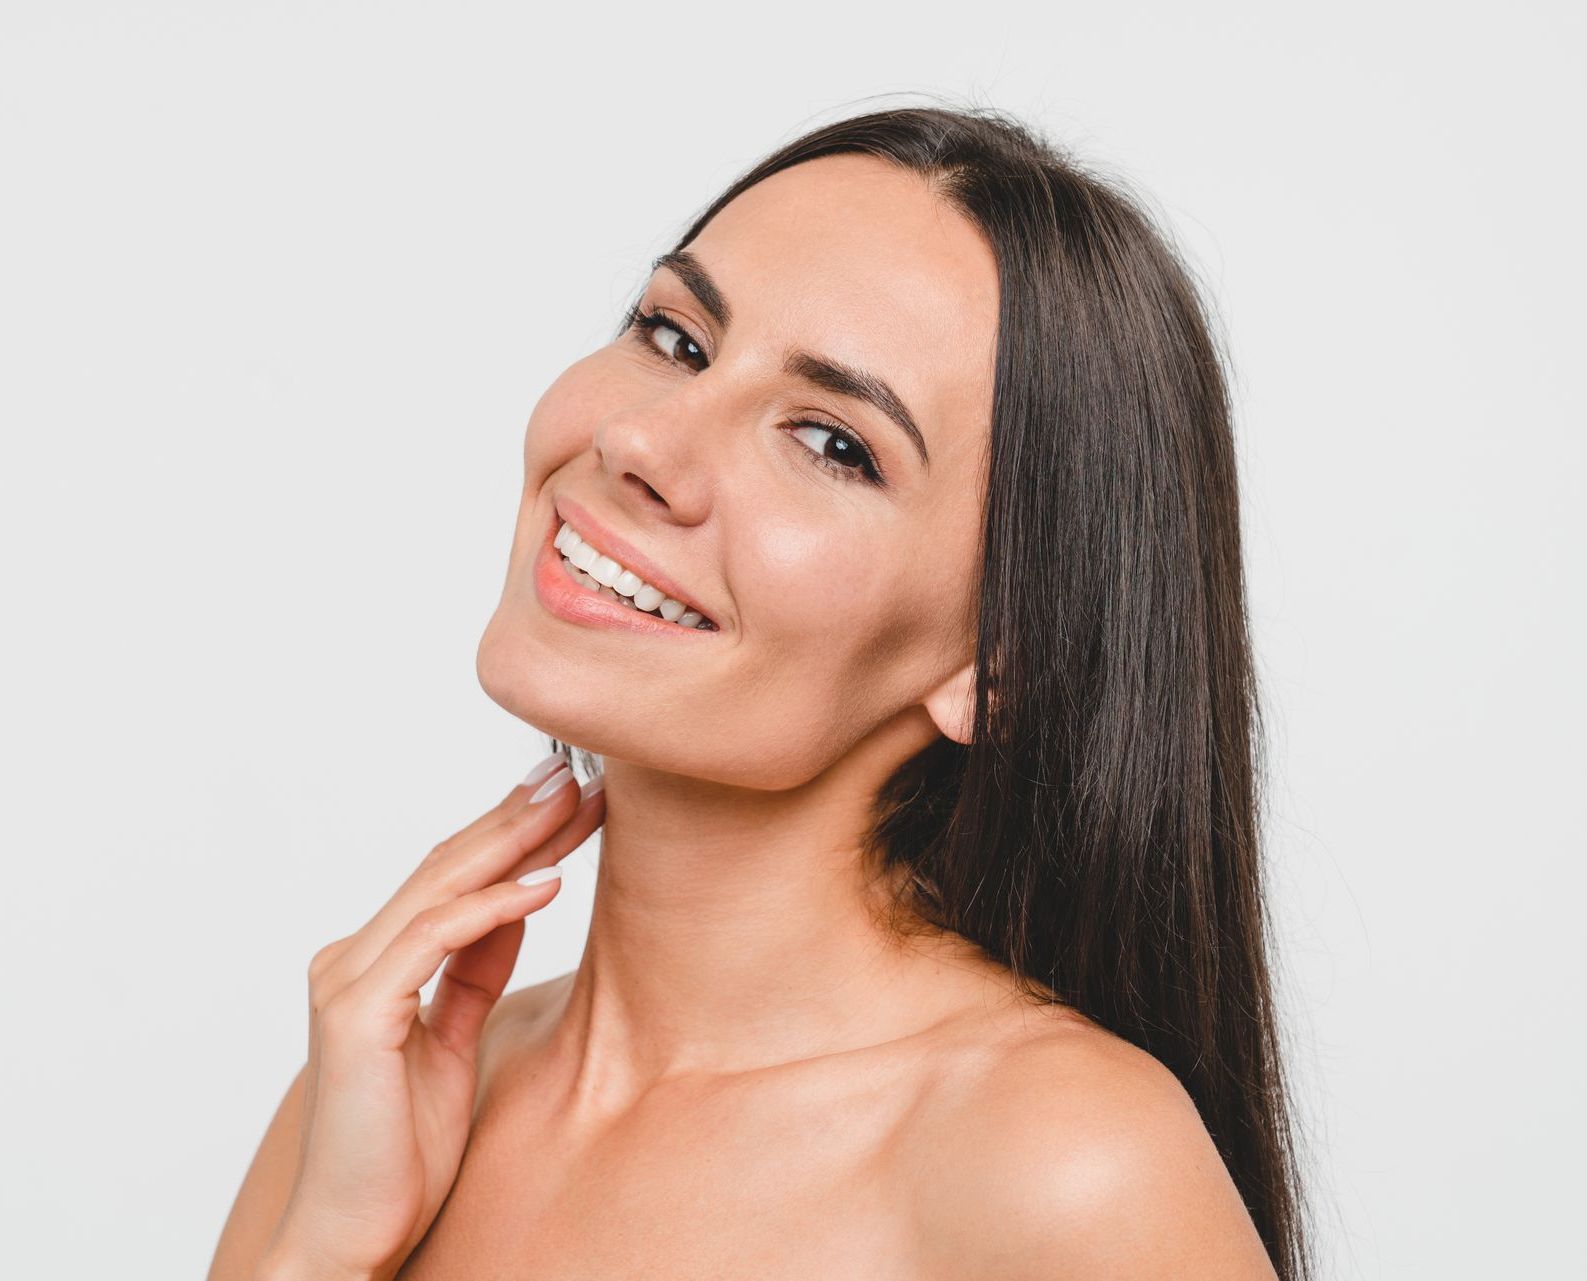 a woman with long hair is smiling and touching her neck 